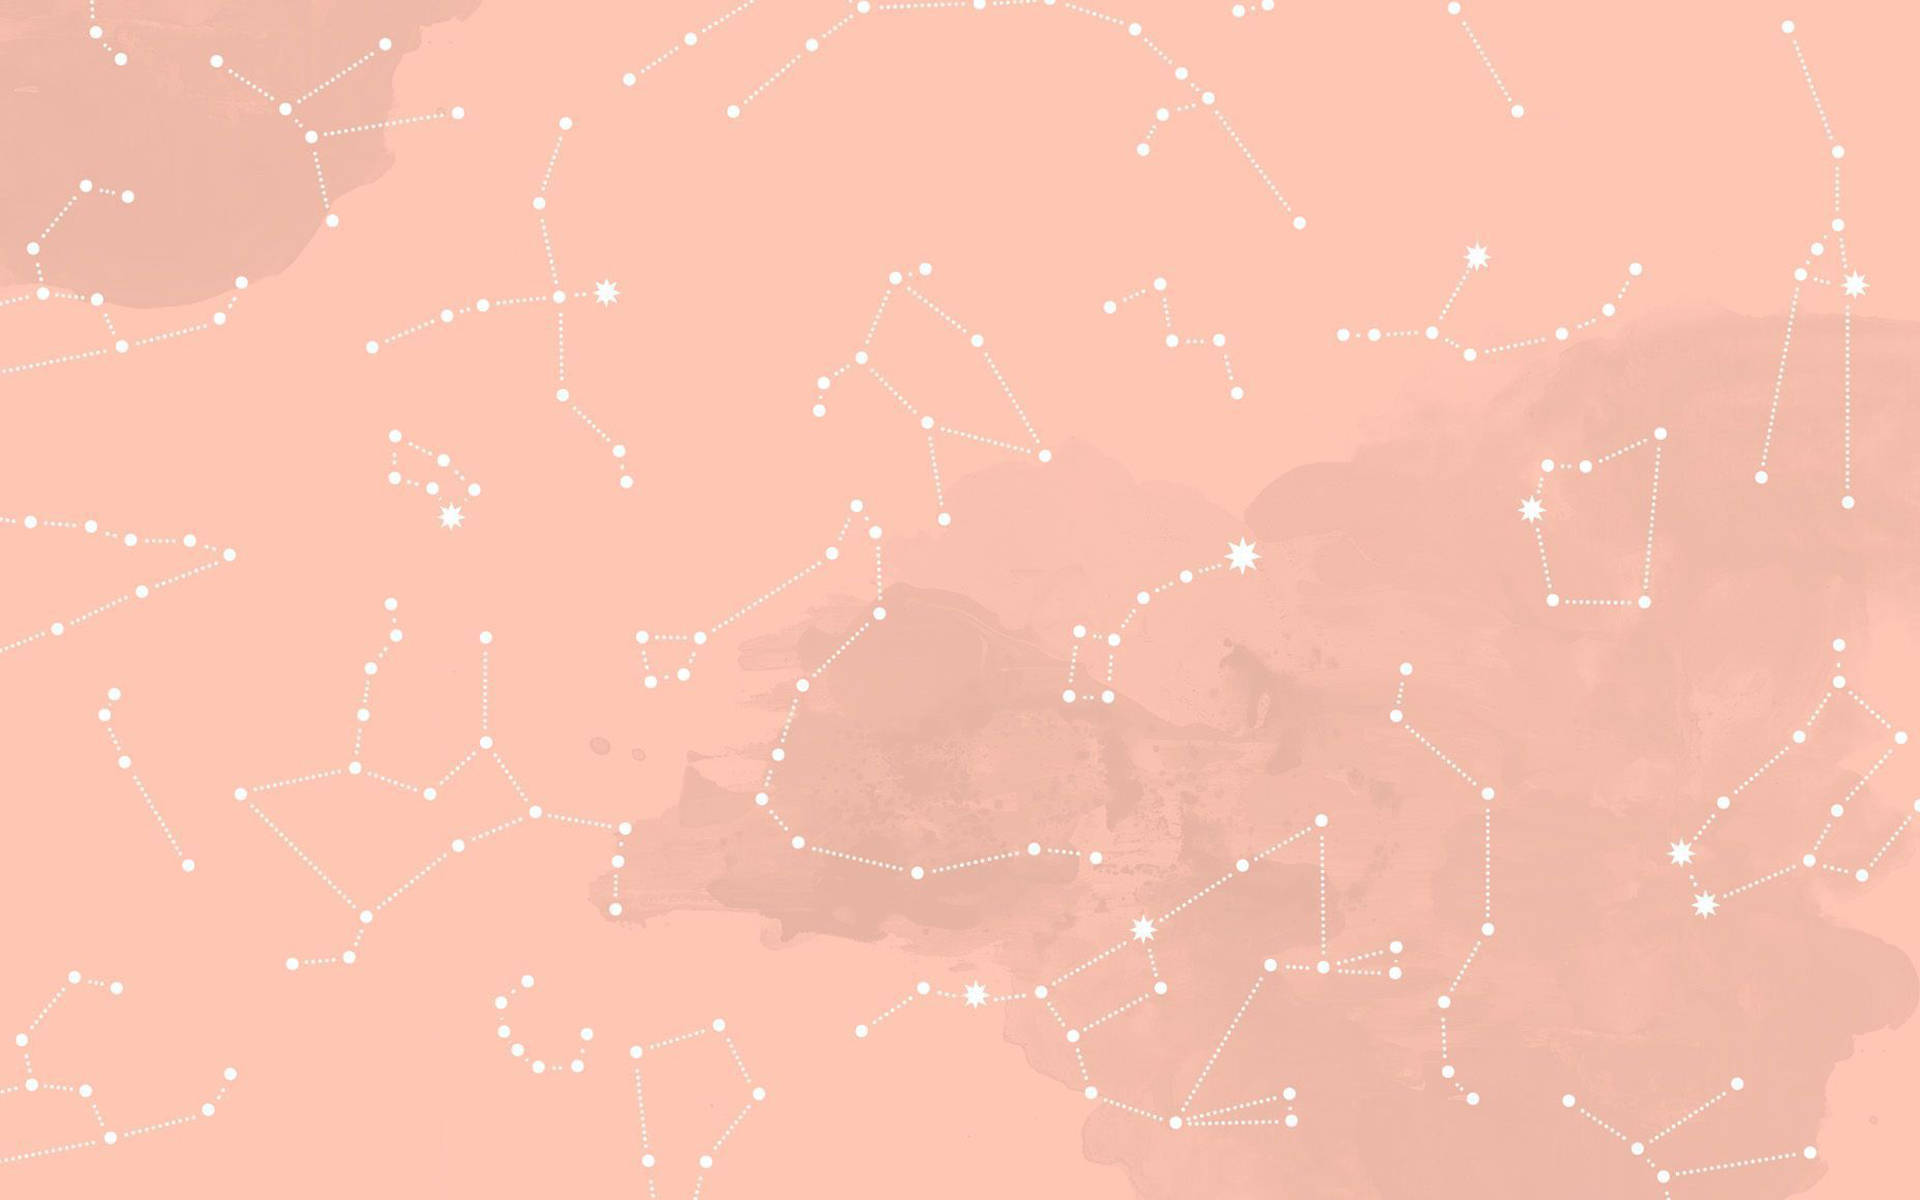 Aesthetic Youtube Constellation Of Stars Background